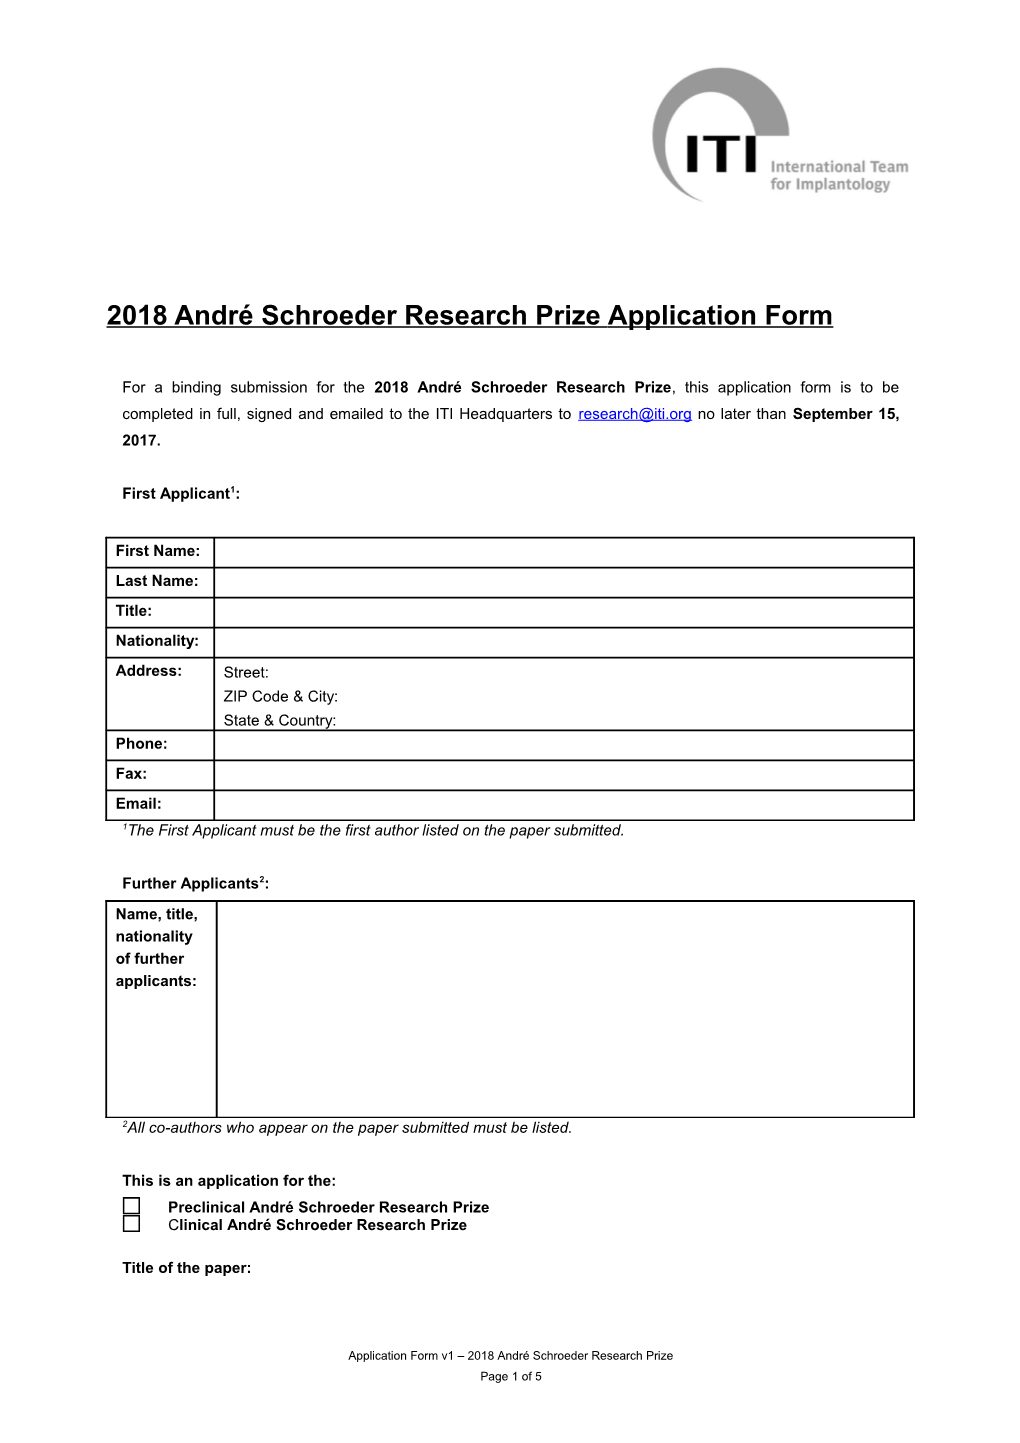 ITI Research Grant Application Guidelines